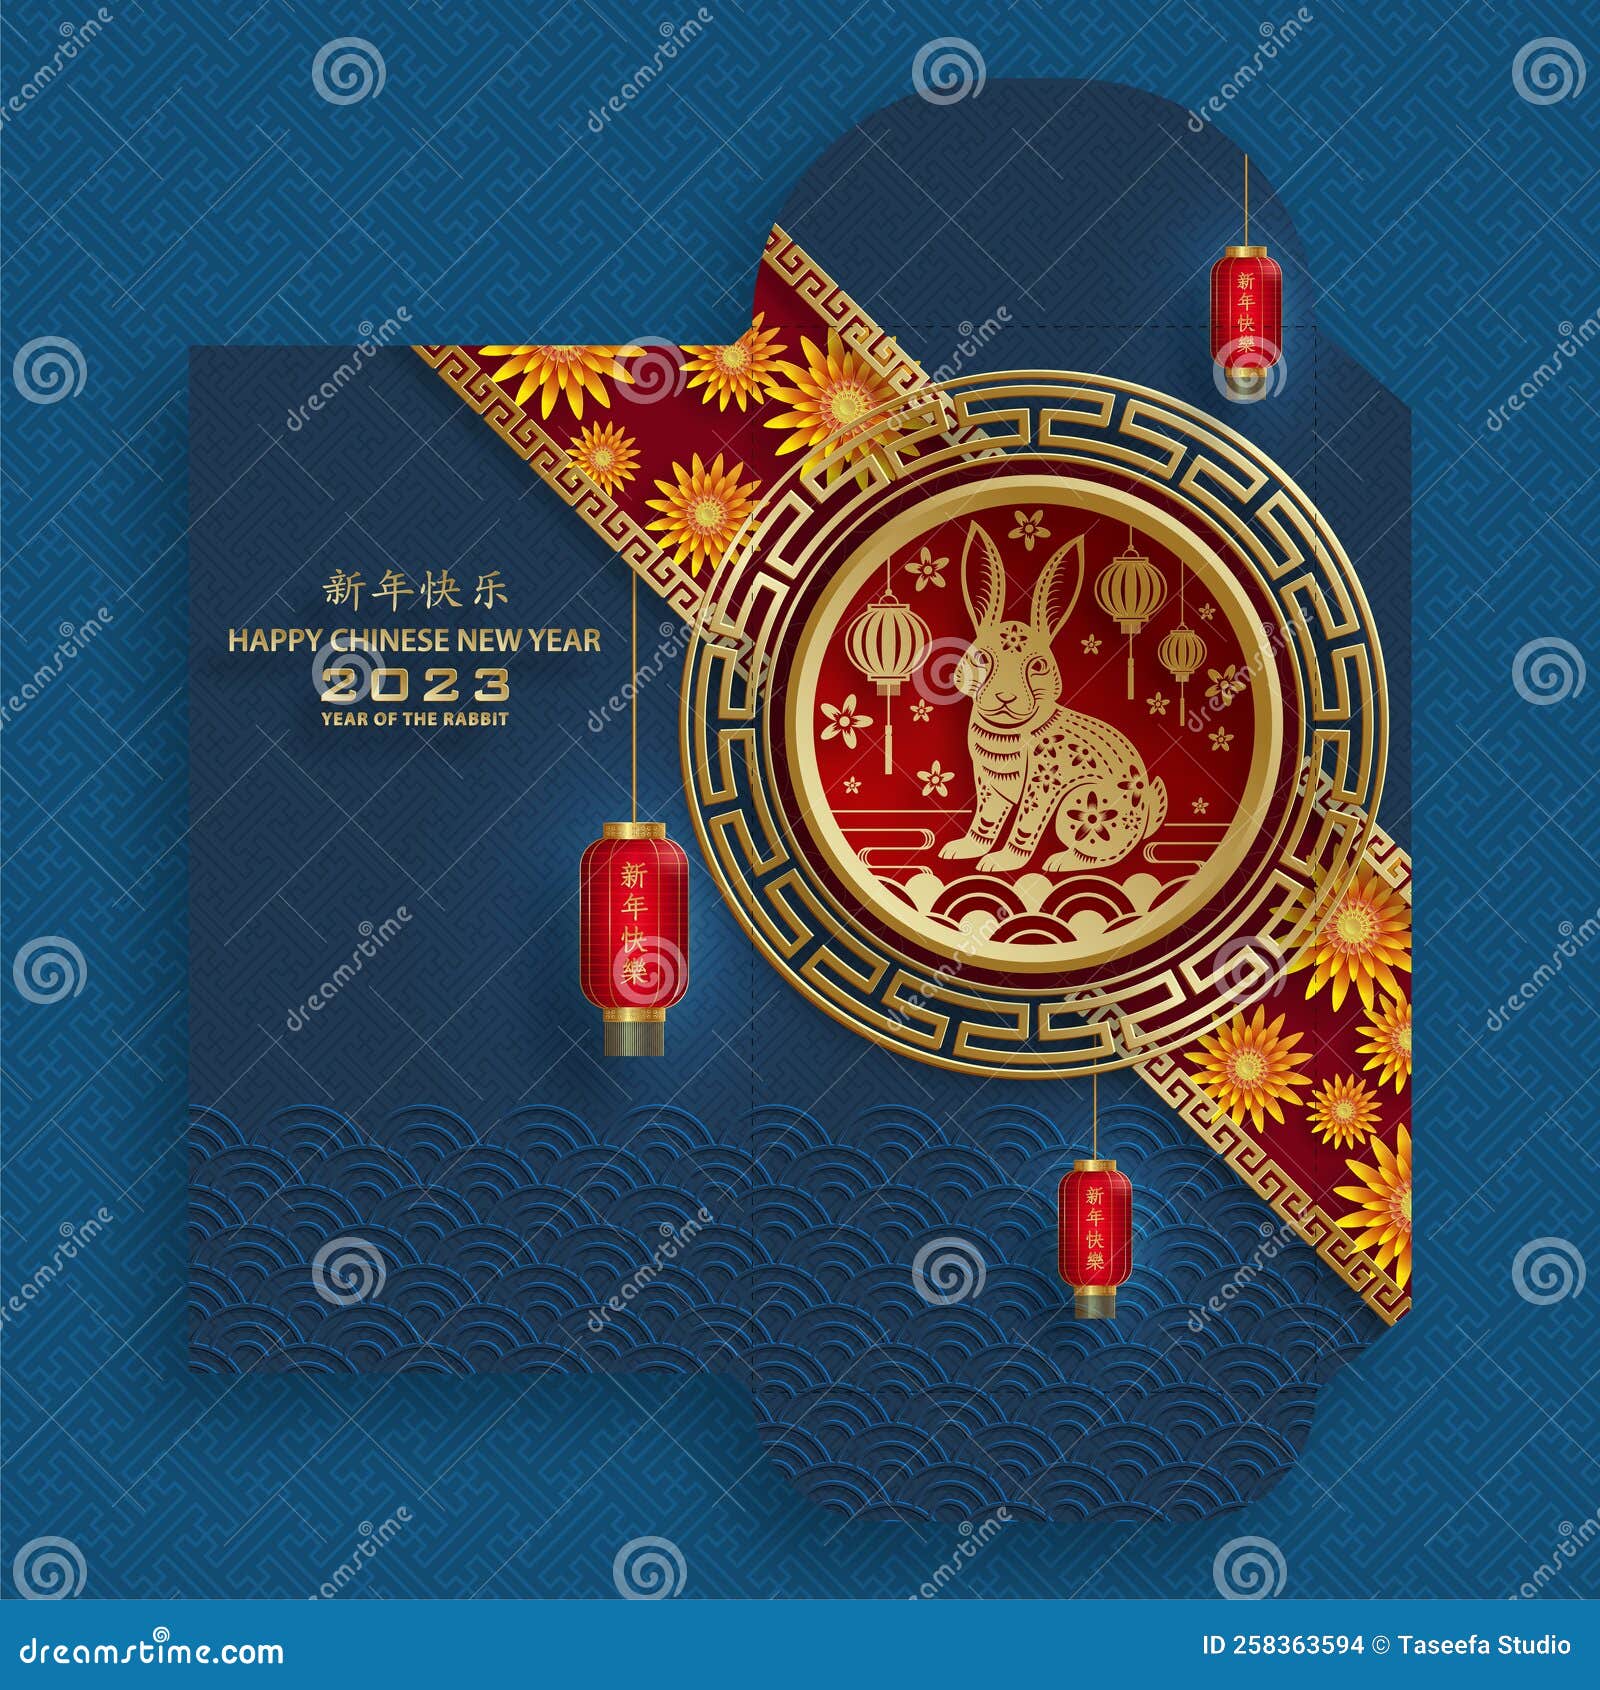 Chinese new year 2020 lucky envelope money packet Vector Image